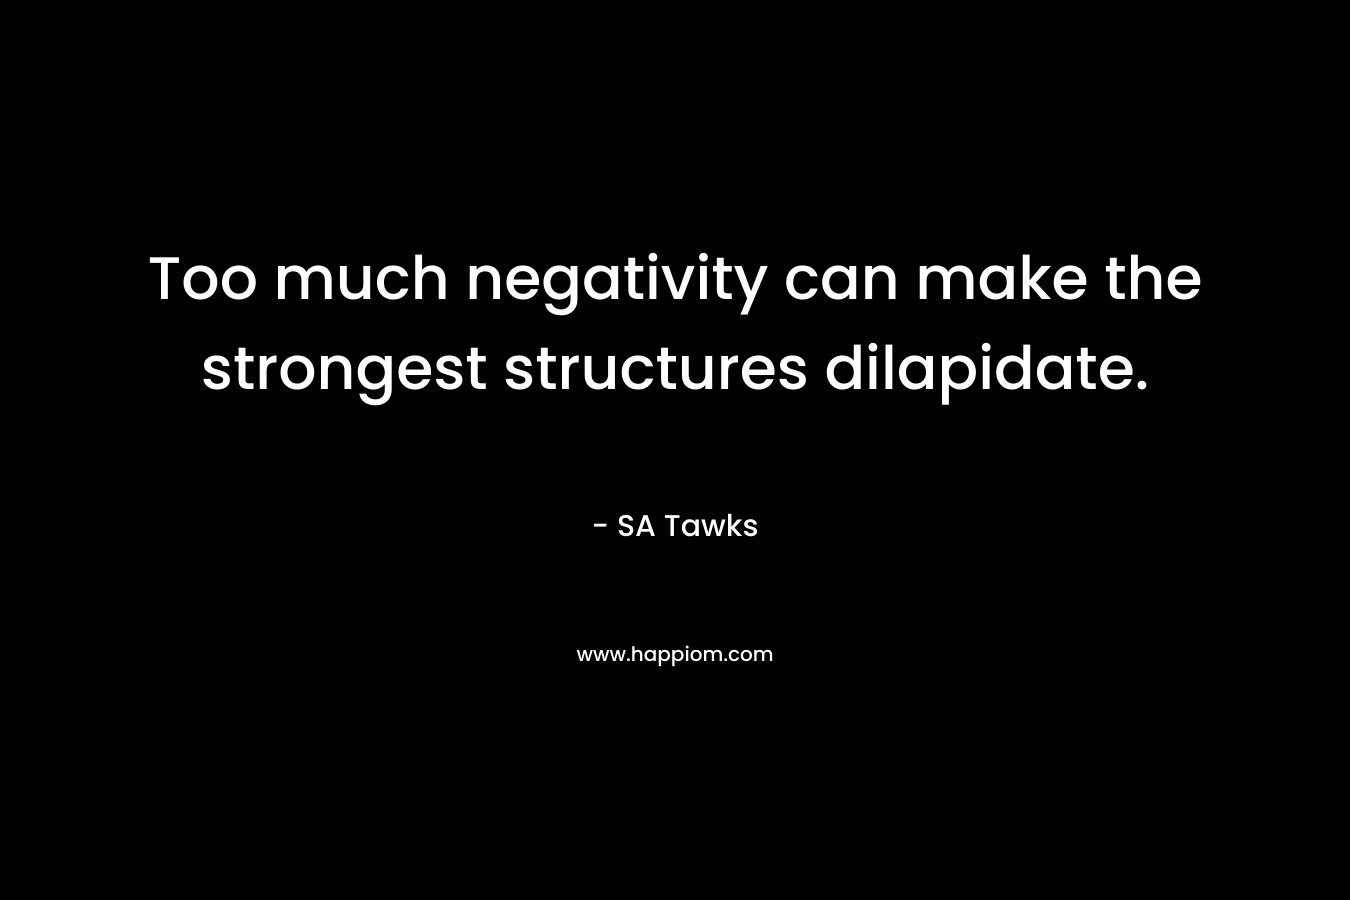 Too much negativity can make the strongest structures dilapidate. – SA Tawks